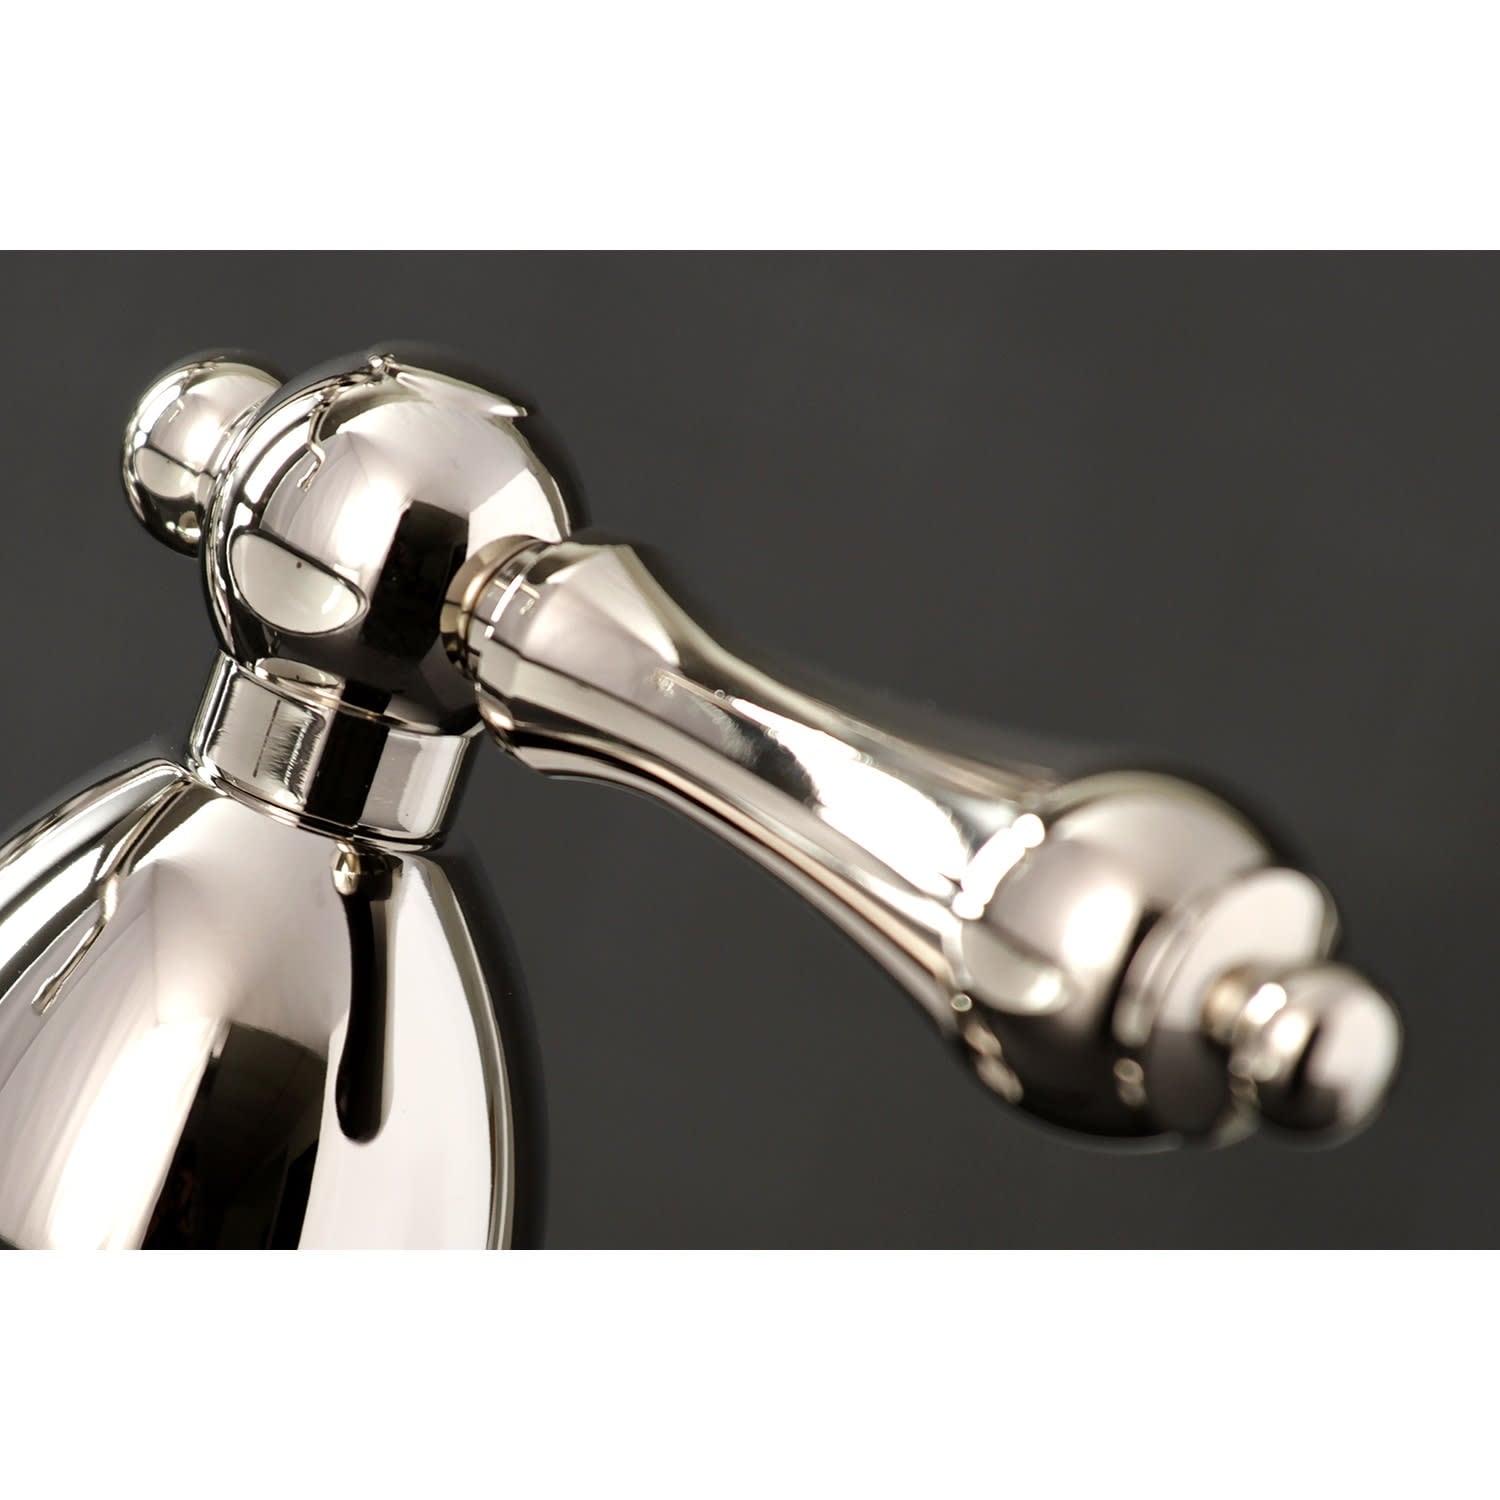 Kingston Brass Heritage 1.2 GPM Widespread Bathroom Faucet with Pop-Up